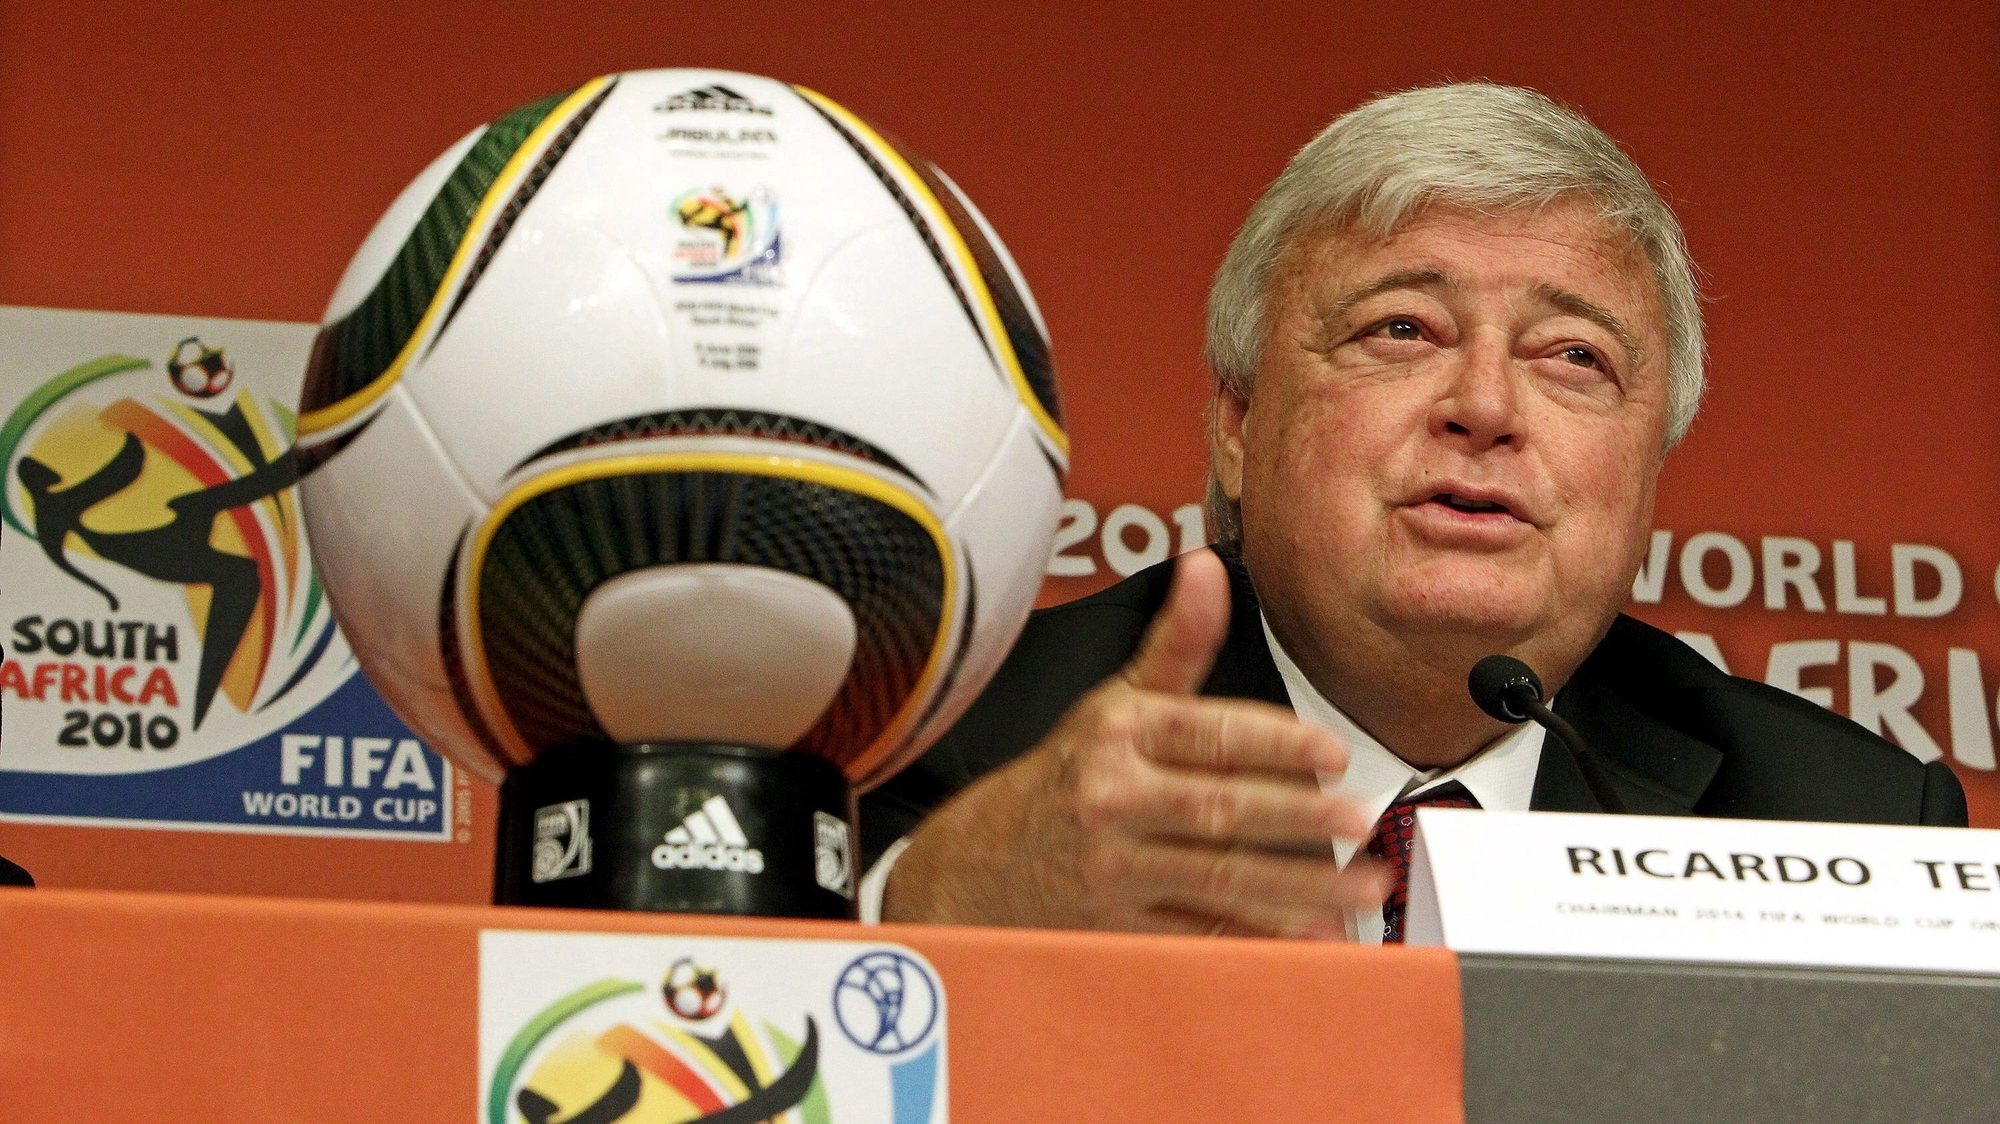 epa03142462 (FILE) A file picture dated 08 July 2010 shows the President of the Brazilian Football Confederation CBF and President of the National 2014 World Cup organizing committee Ricardo Teixeira attending a press conference in Johannesburg, South Africa. According to the CBF&#039;s vice president, Jose Maria Marin, in Rio de Janeiro on 12 March 2012, Ricardo Teixeira resigned from office after years of allegations of corruption.  EPA/SRDJAN SUKI